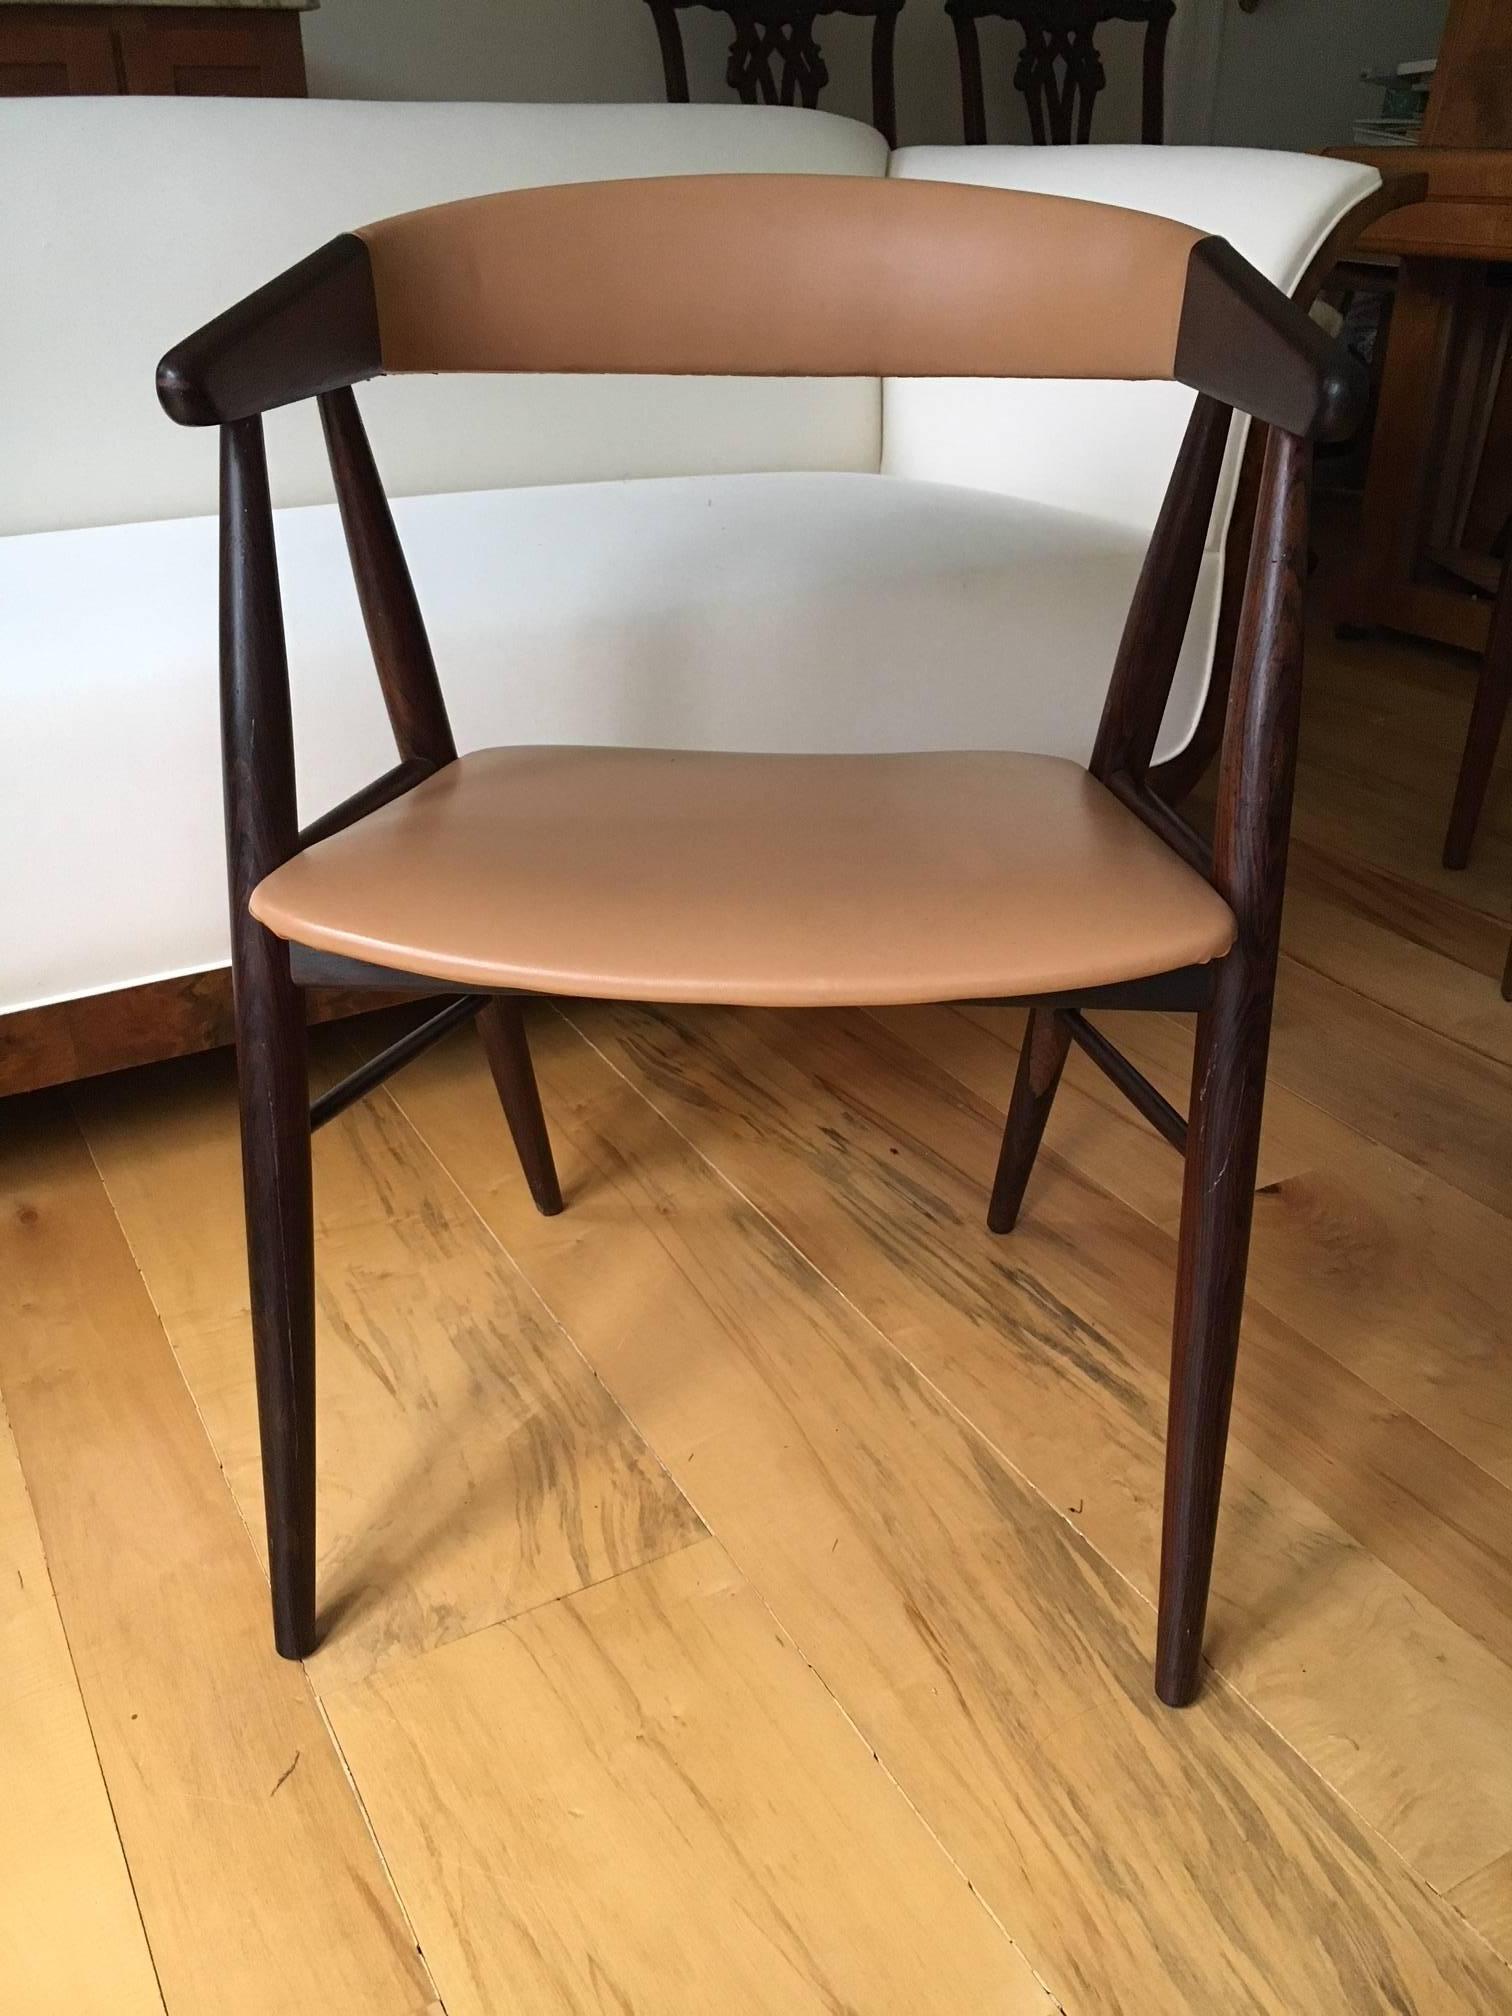 Fabulous Danish Modern desk chair, of rosewood, with a light camel shade of leather on the seat and back. A Classic example of Danish design, combining elegant form and incredible comfort and support while seated.